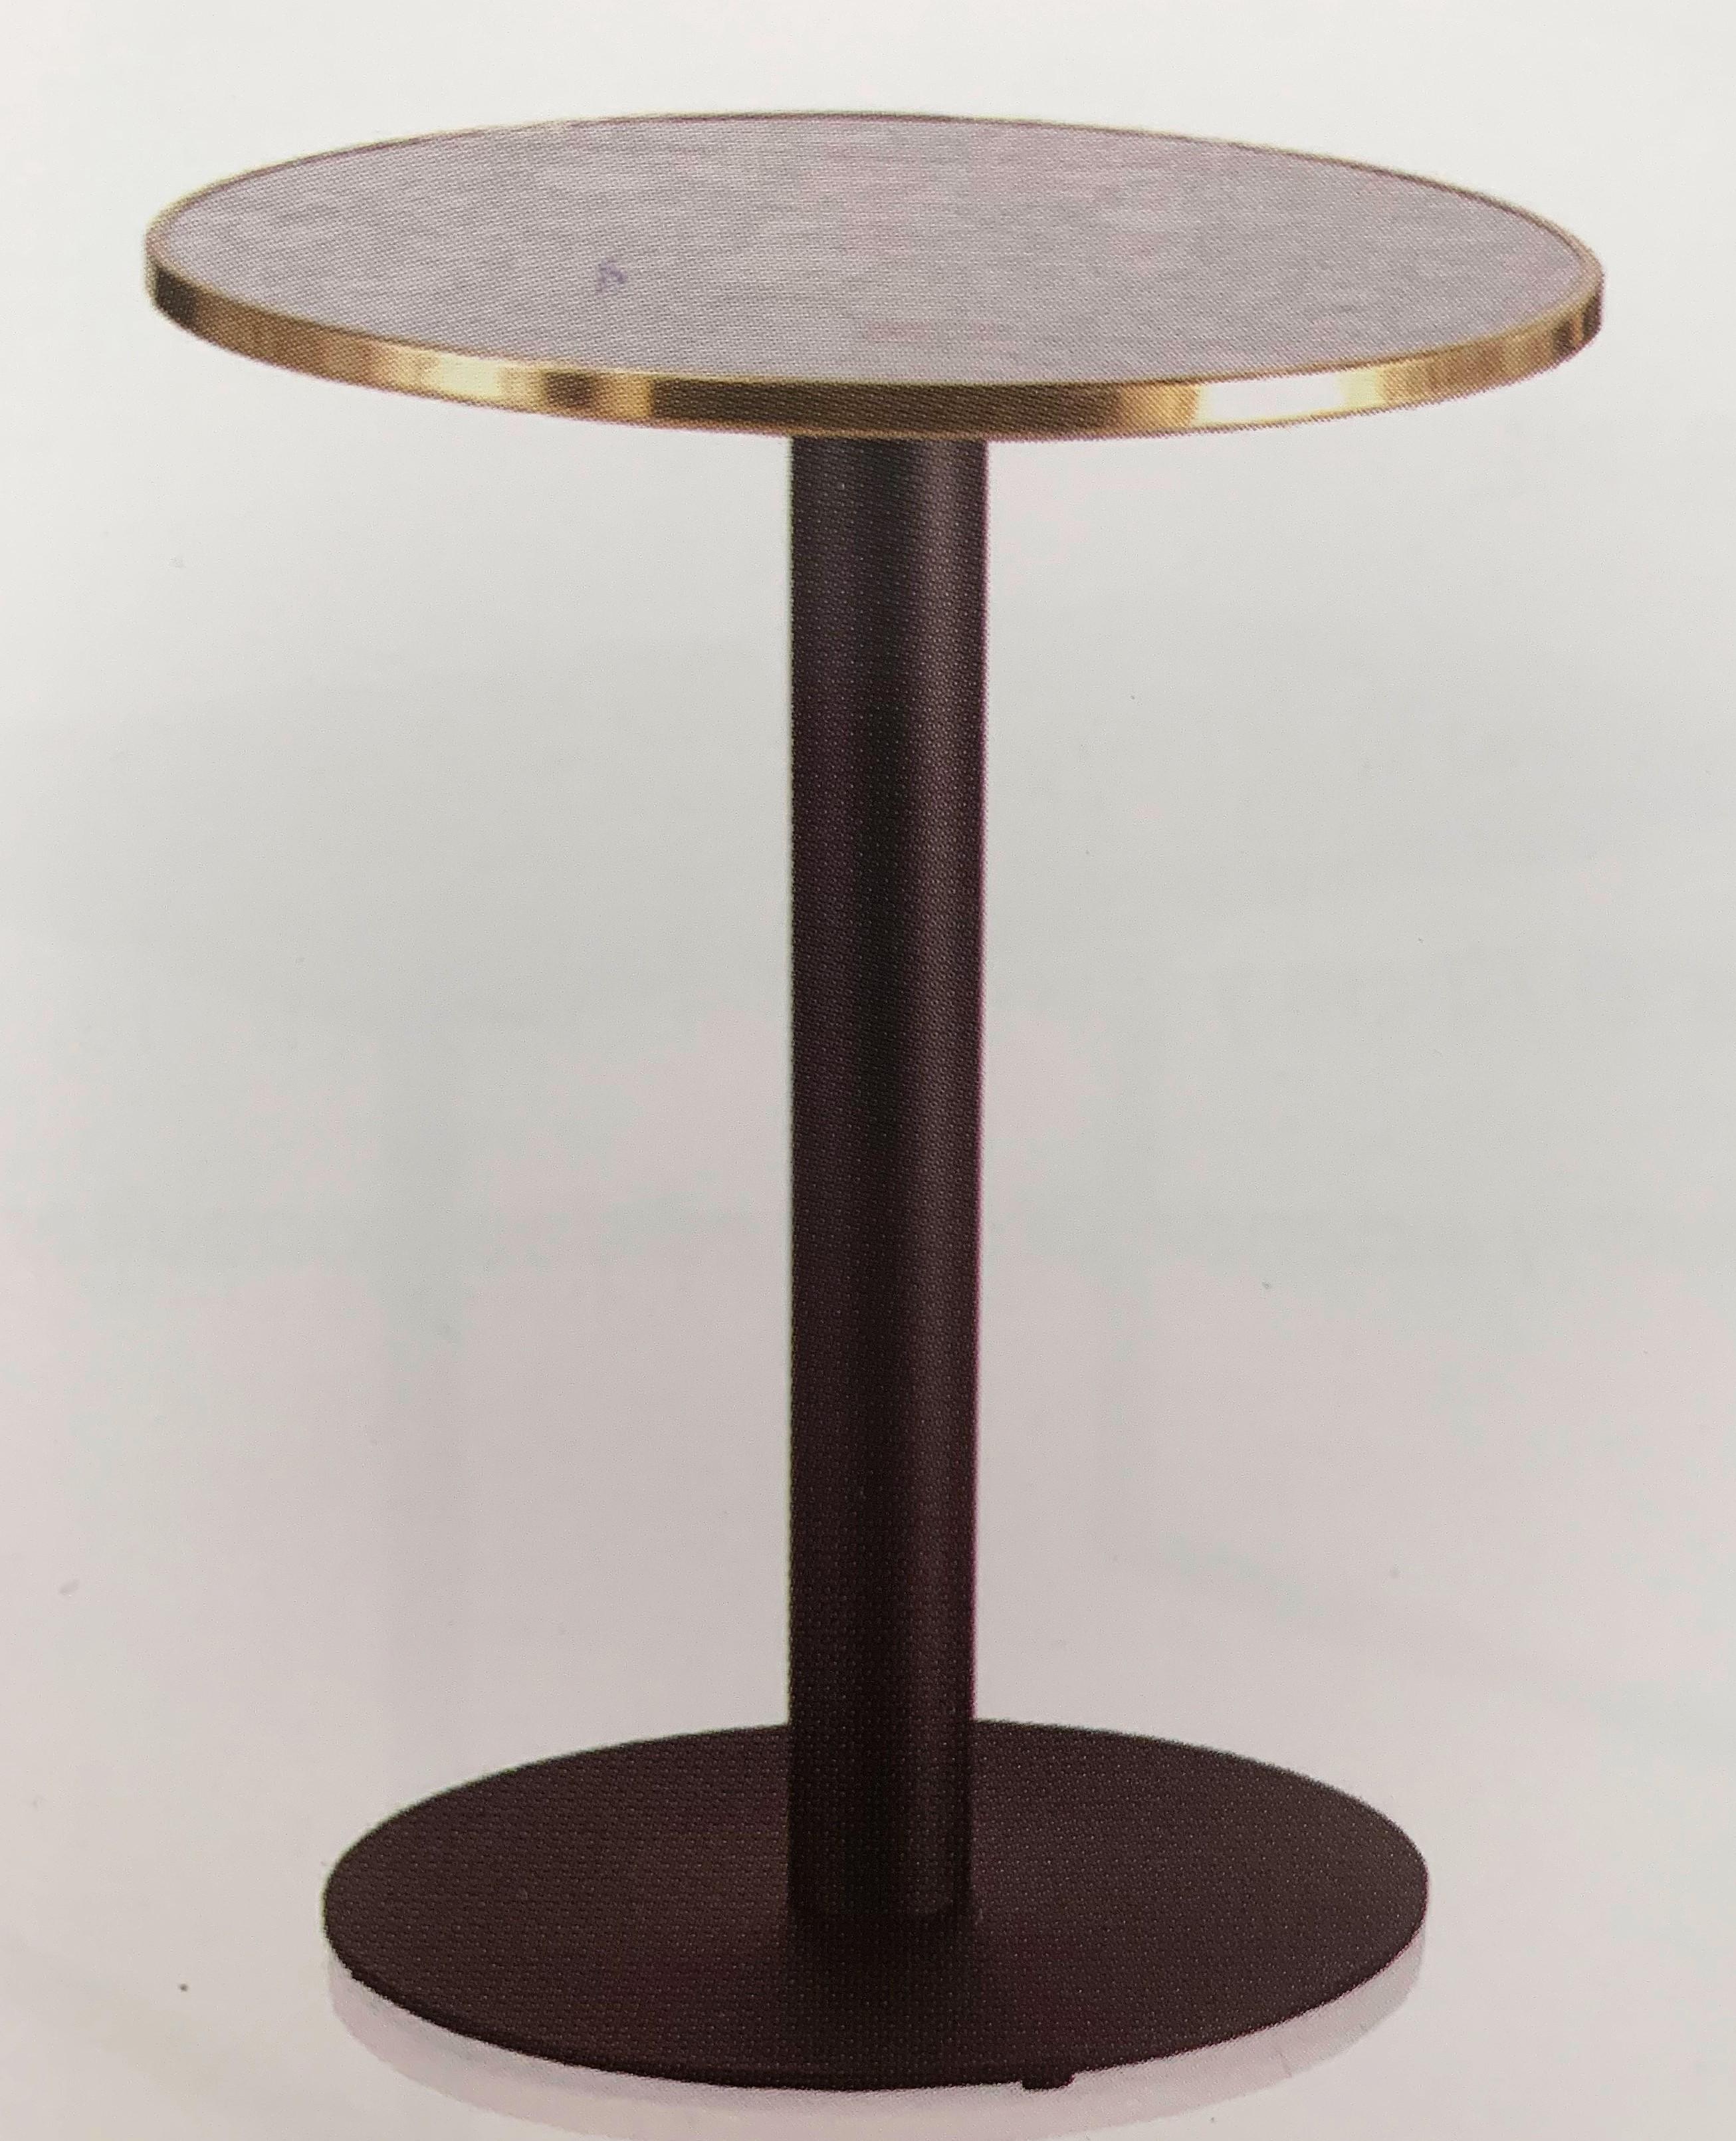 Bistro high table in wrought iron with marble top.

Discounts for quantity , Hopitality

Measures: Base: Diameter 15.75in
Mast: Diameter 3.15in

You can choose differents models and colors.